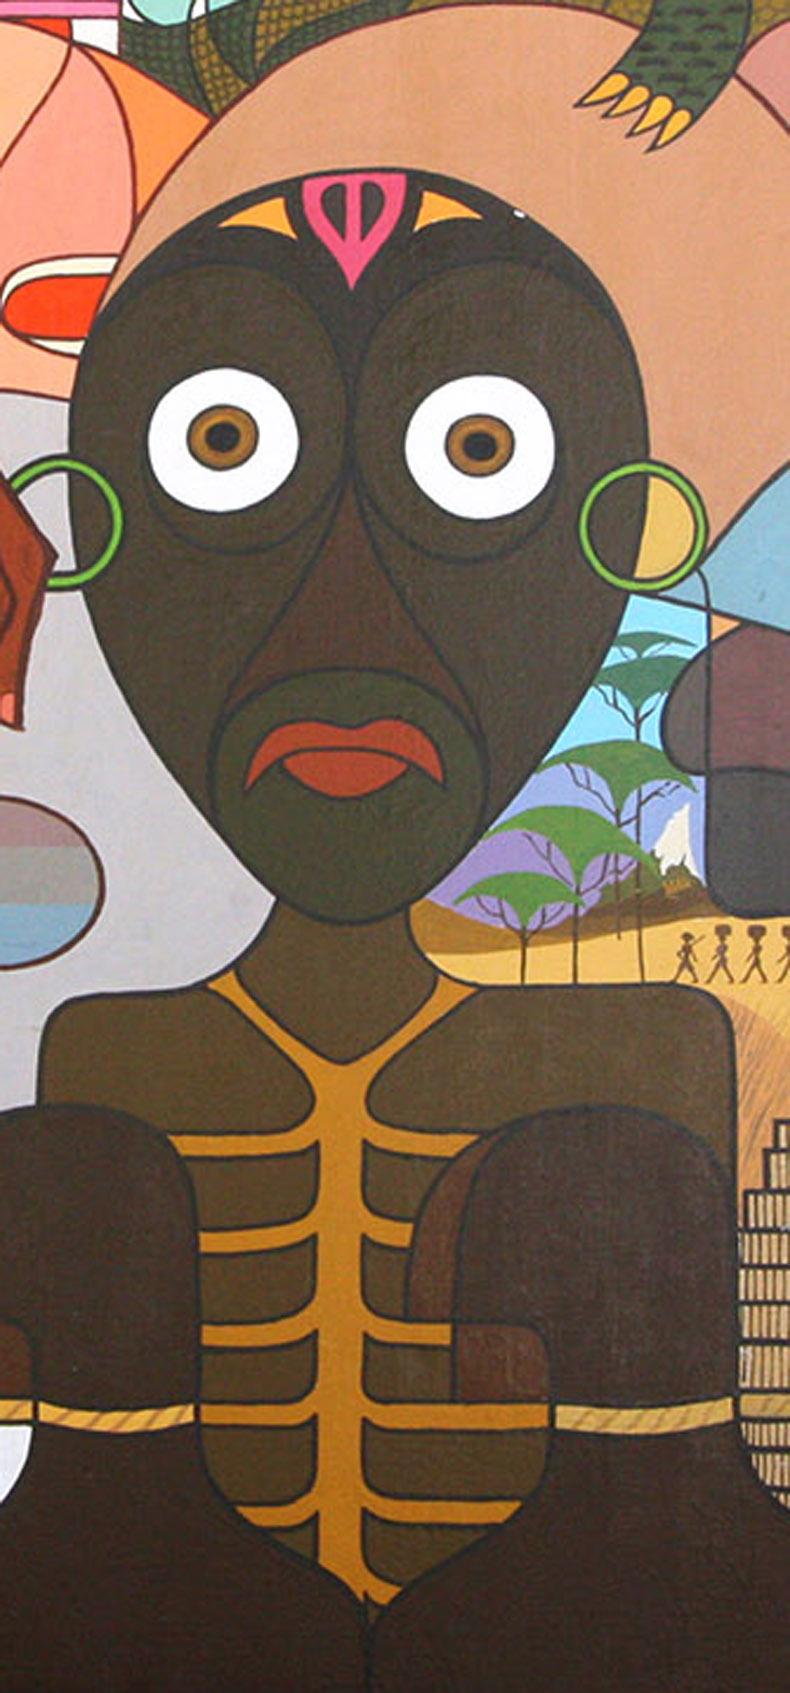 Africa - Cubist Painting by Kenneth B Walsh